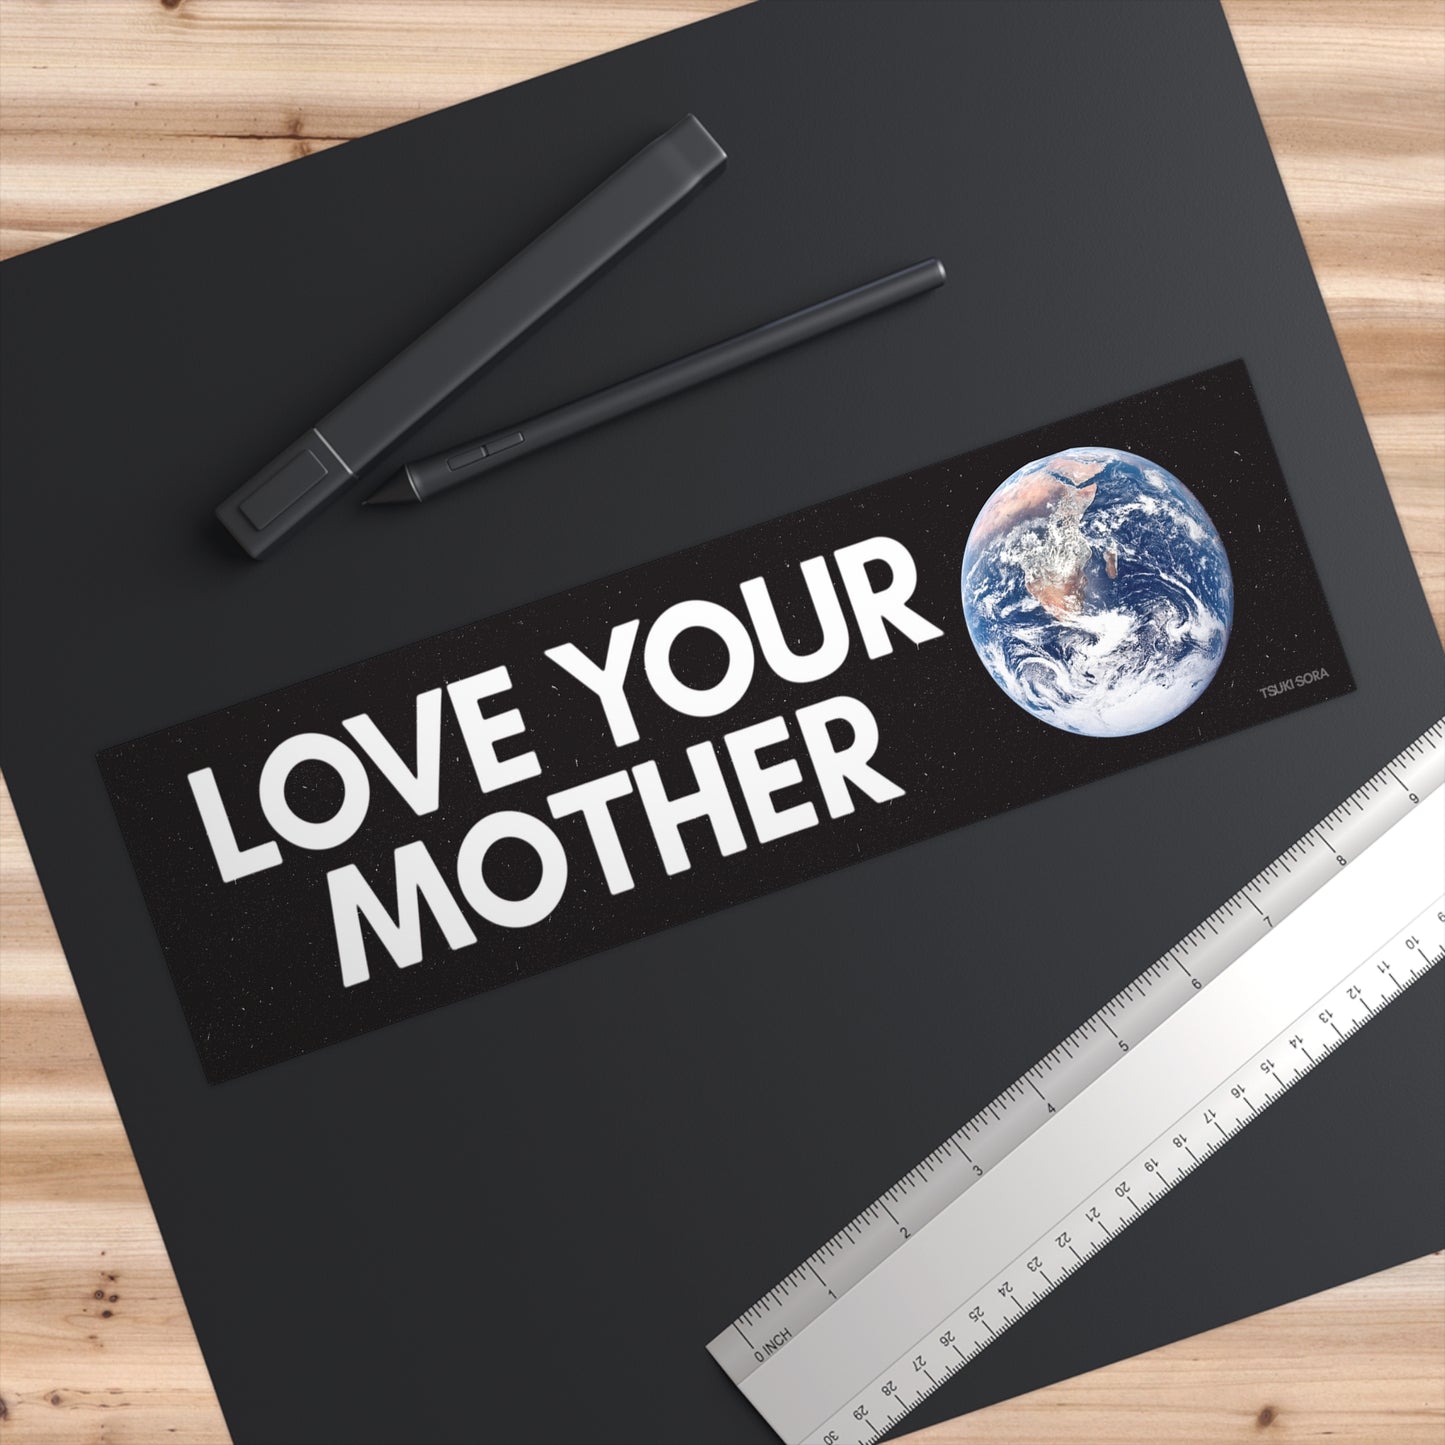 Love Your Mother Earth Bumper Sticker